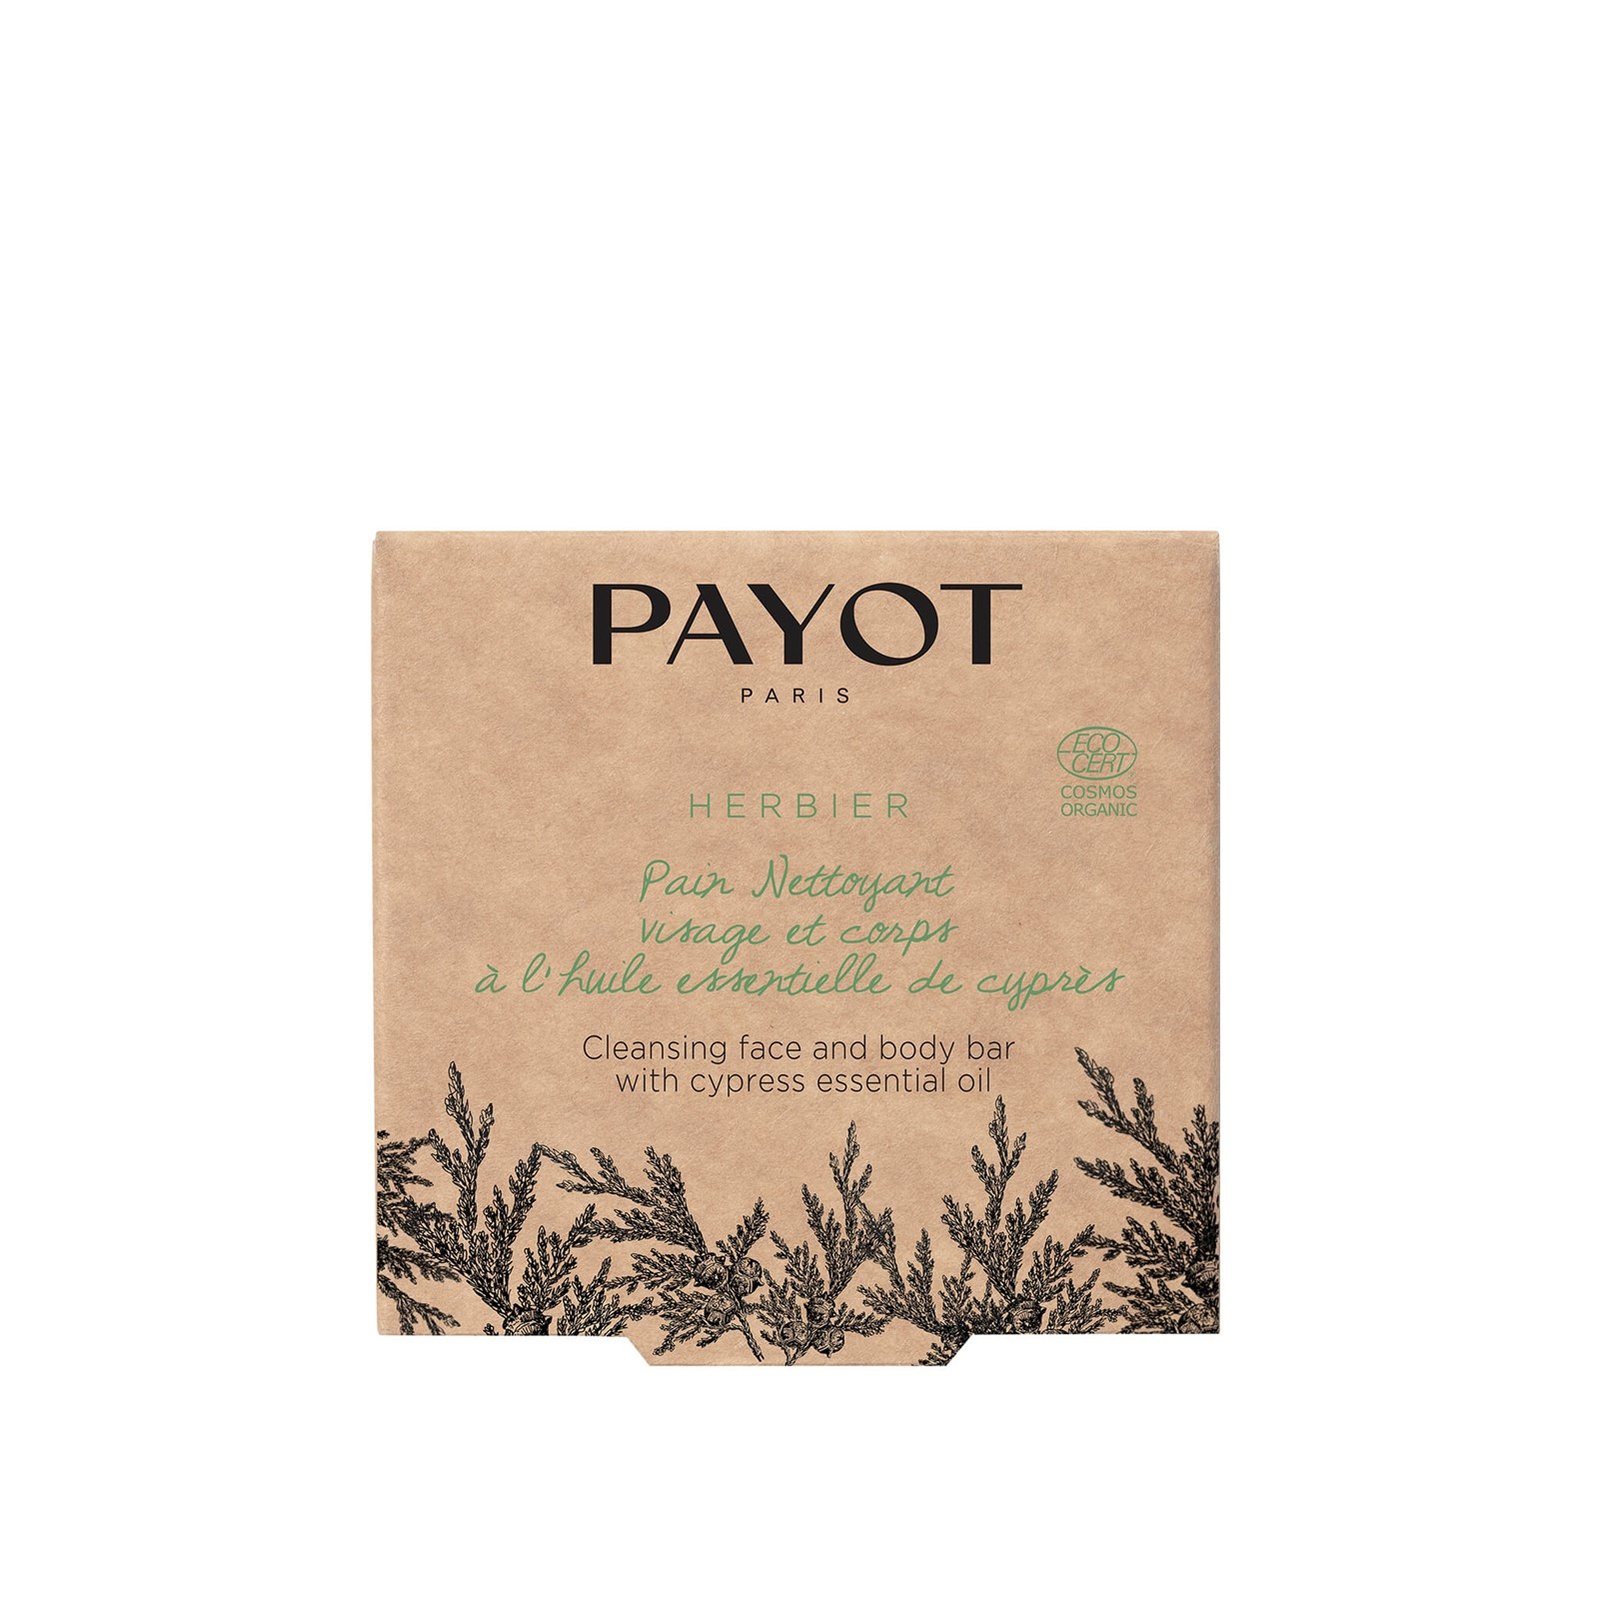 Payot Herbier Cleansing Face And Body Bar With Cypress Essential Oil 85g